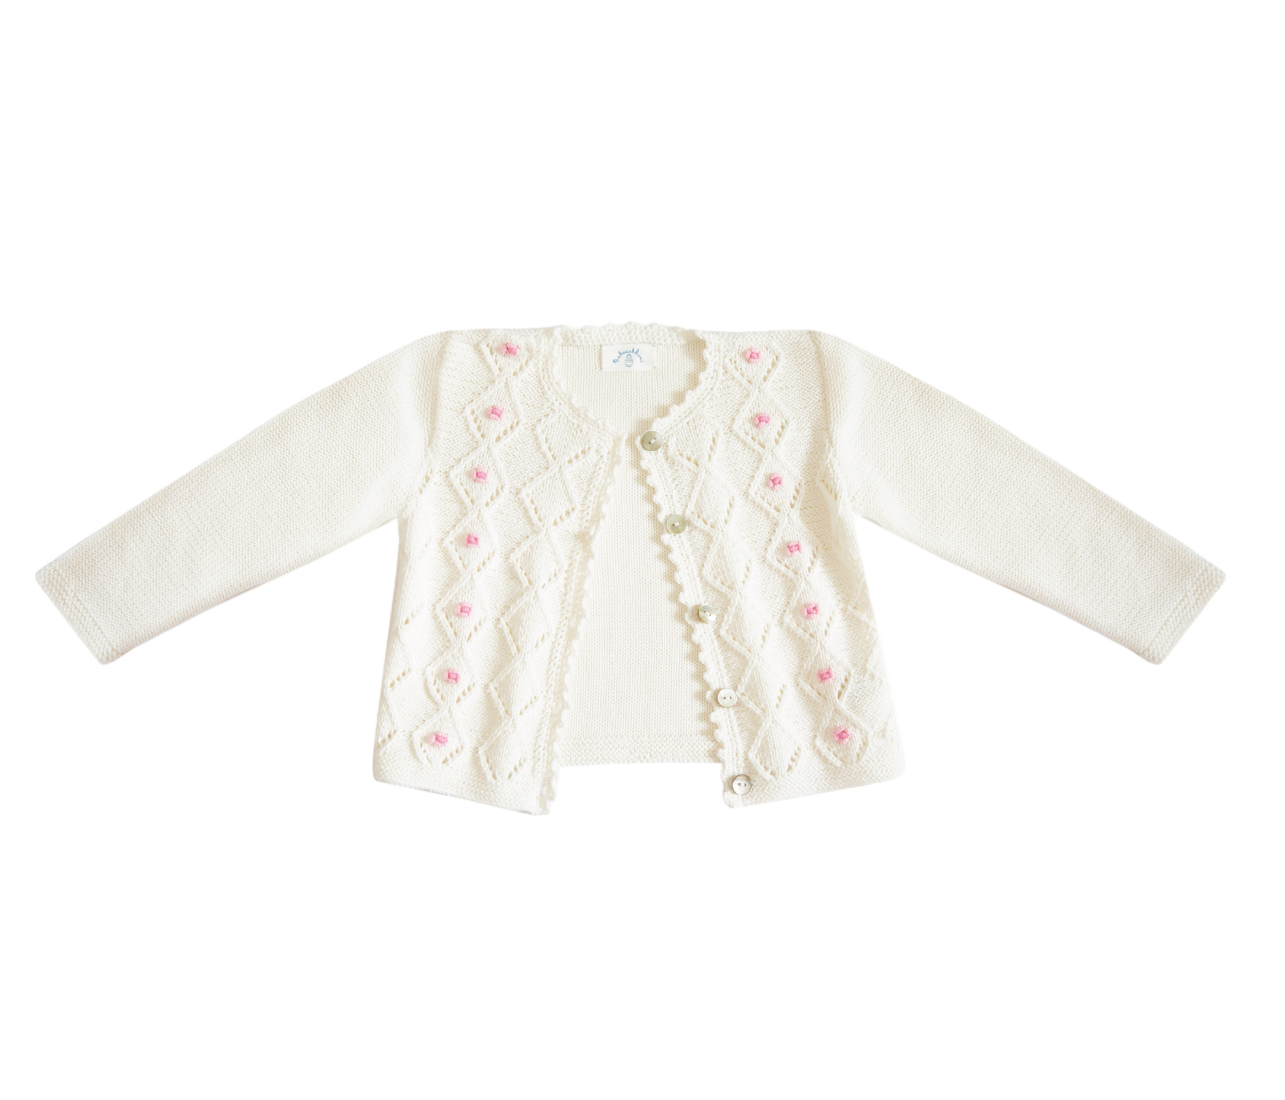 Embroidered Tirolese Cardigan, Pink Flowers